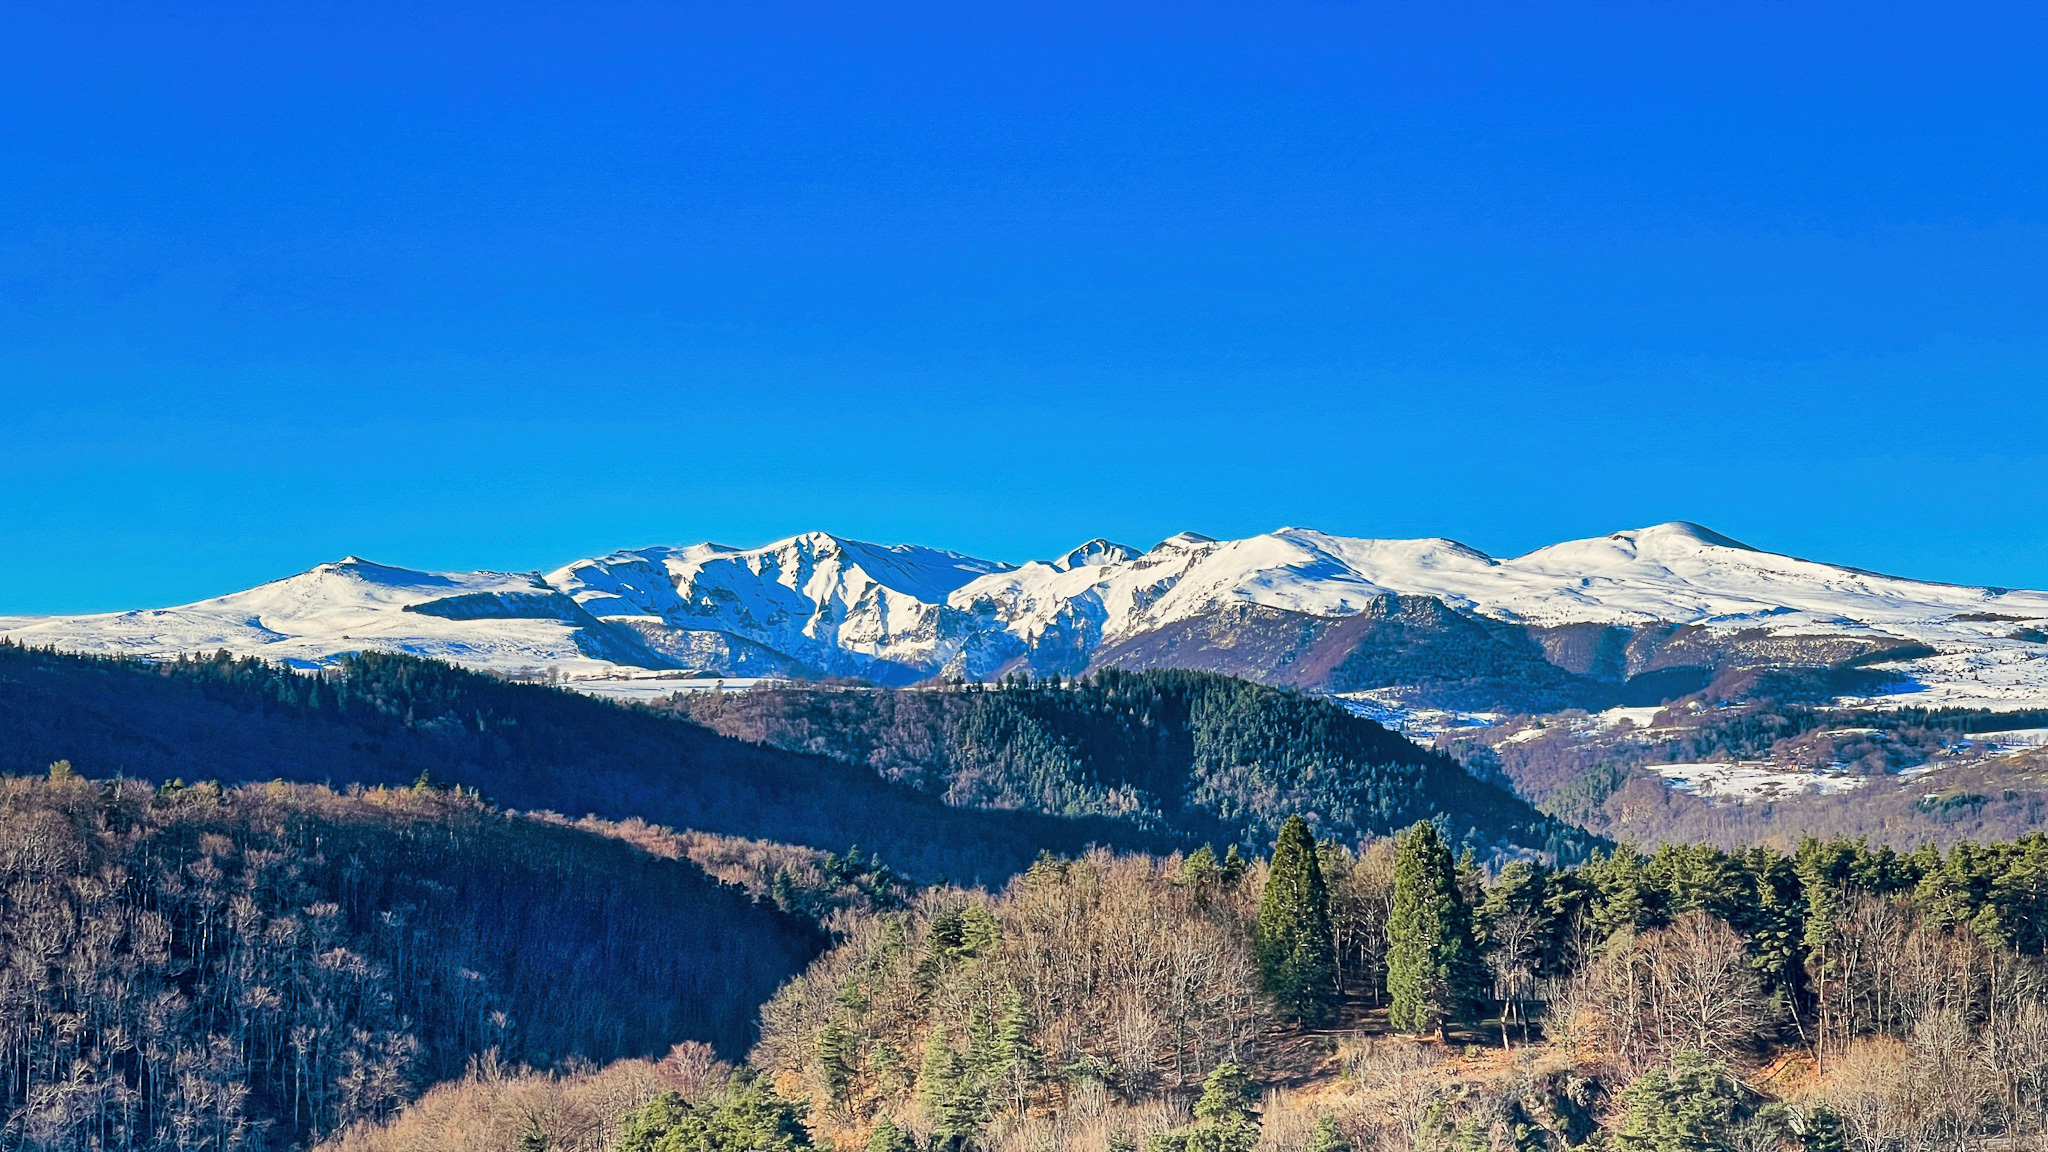 The Auvergne Forest and the Massif du Sancy